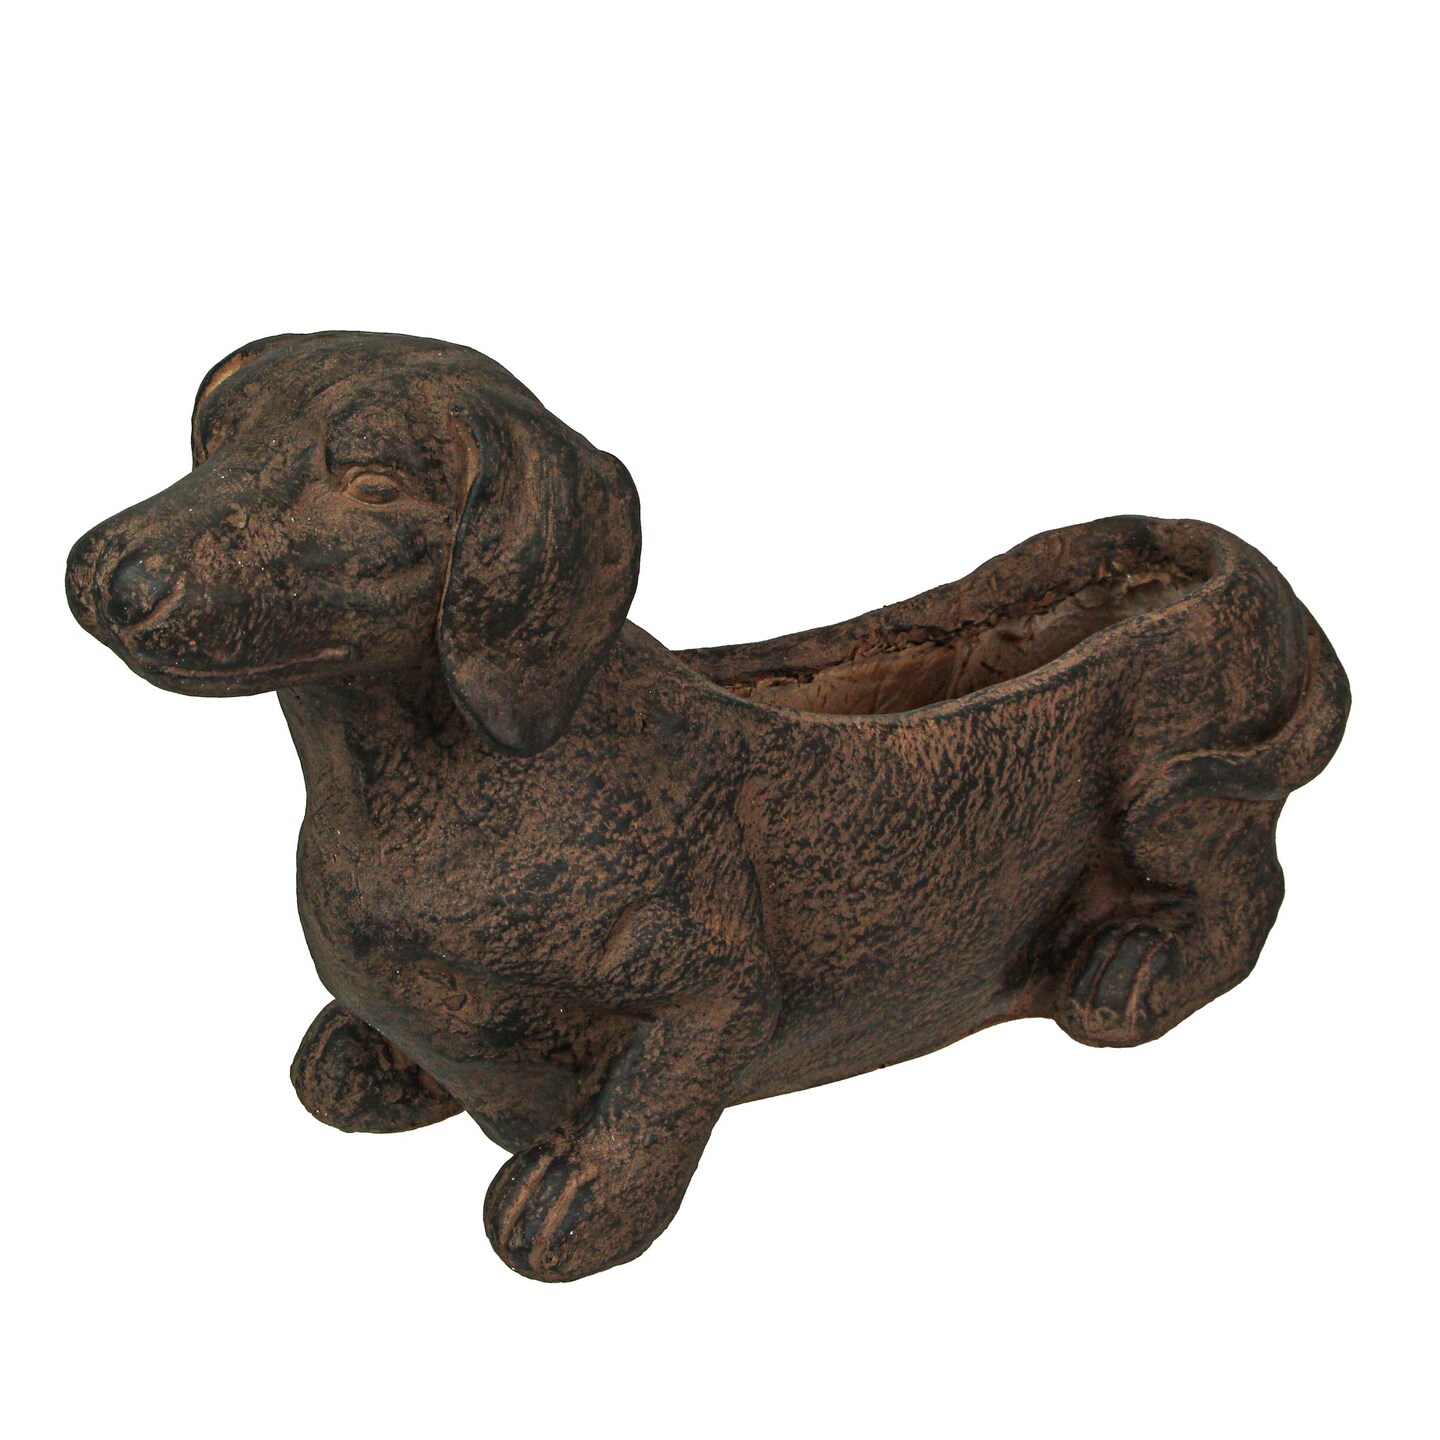 Resin Distressed Rustic Finish Dachshund Dog Indoor Outdoor Planter